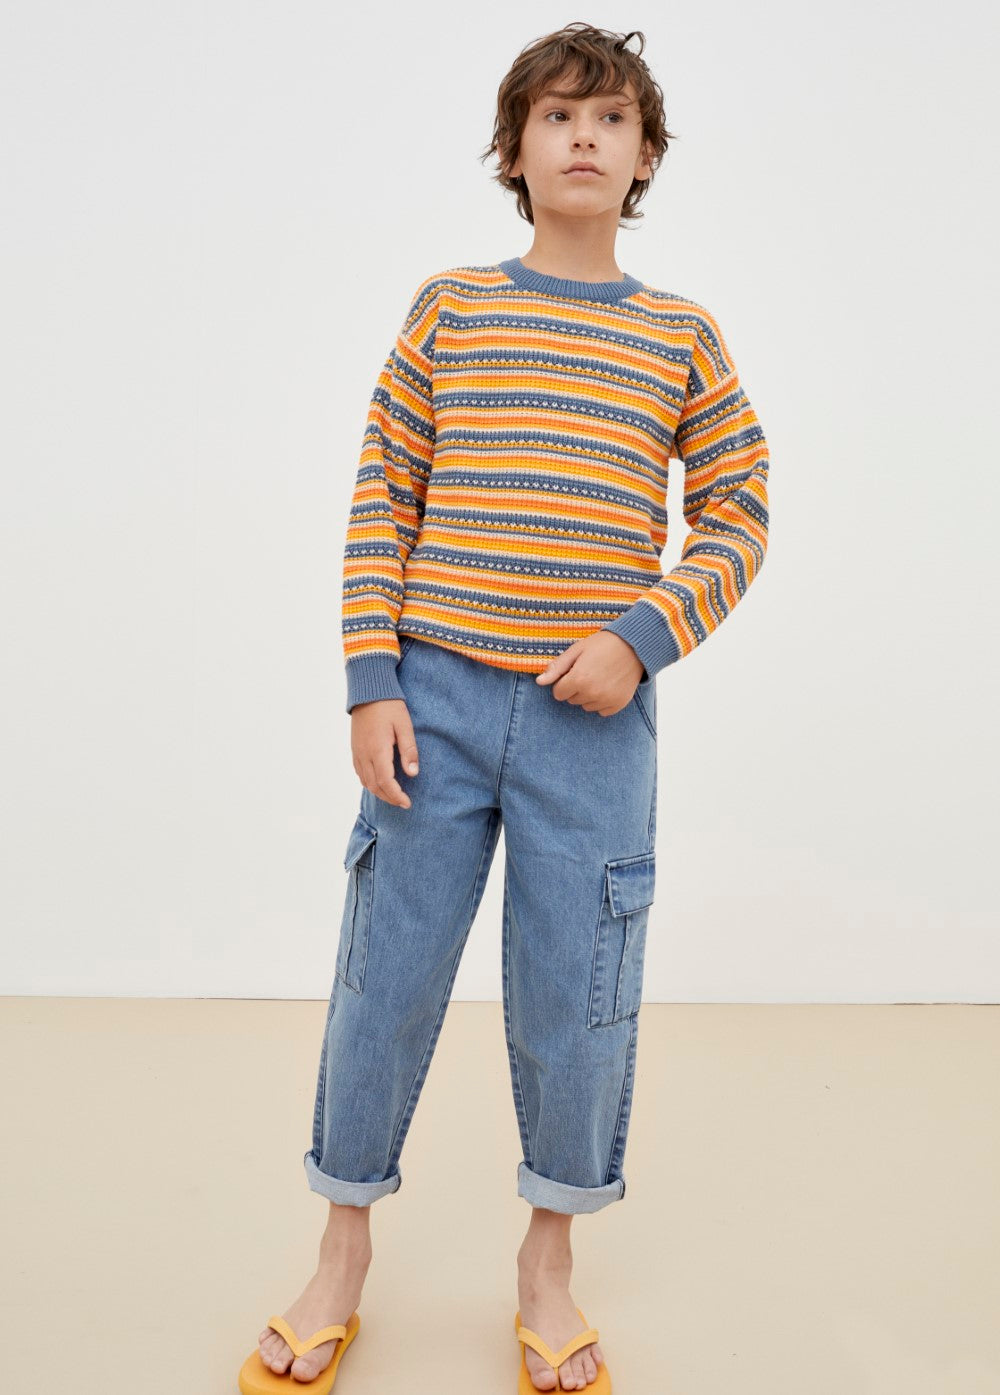 KNITWEAR KIDS SS23 – We are the new society